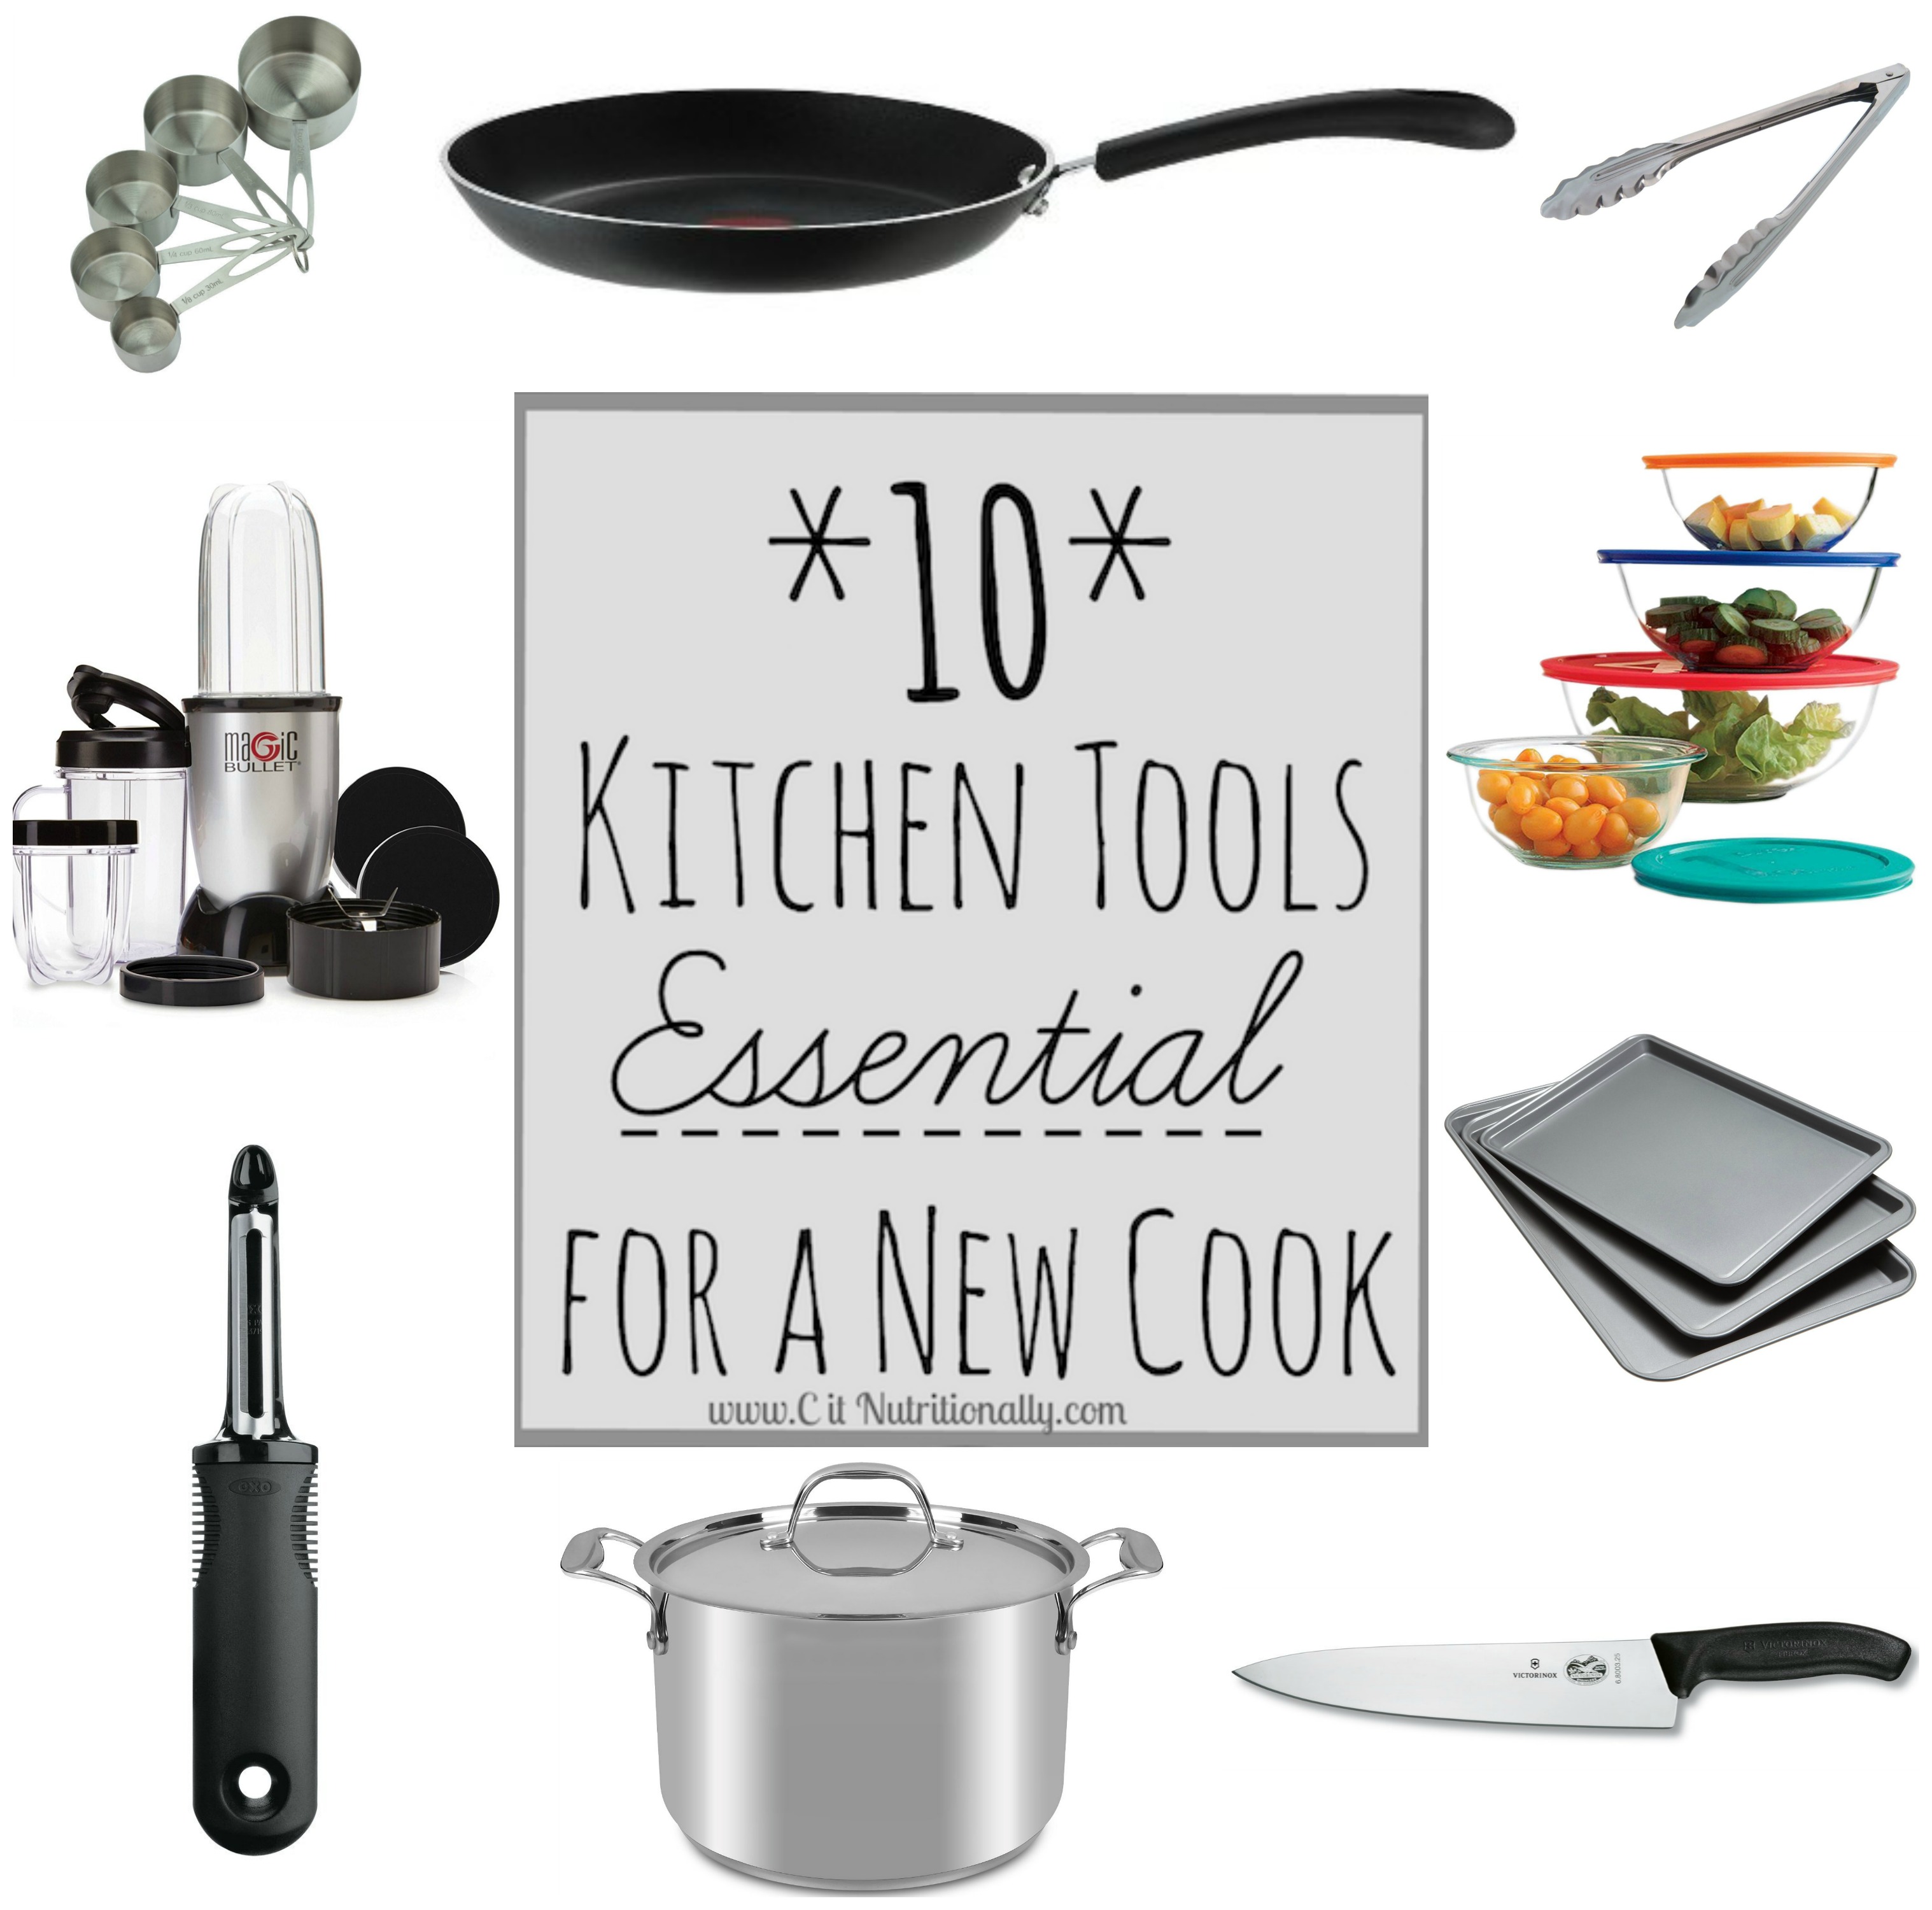 https://chelseyamernutrition.com/wp-content/uploads/2016/09/10-Kitchen-Tools-Essential-for-a-New-Cook-titled-2.jpg